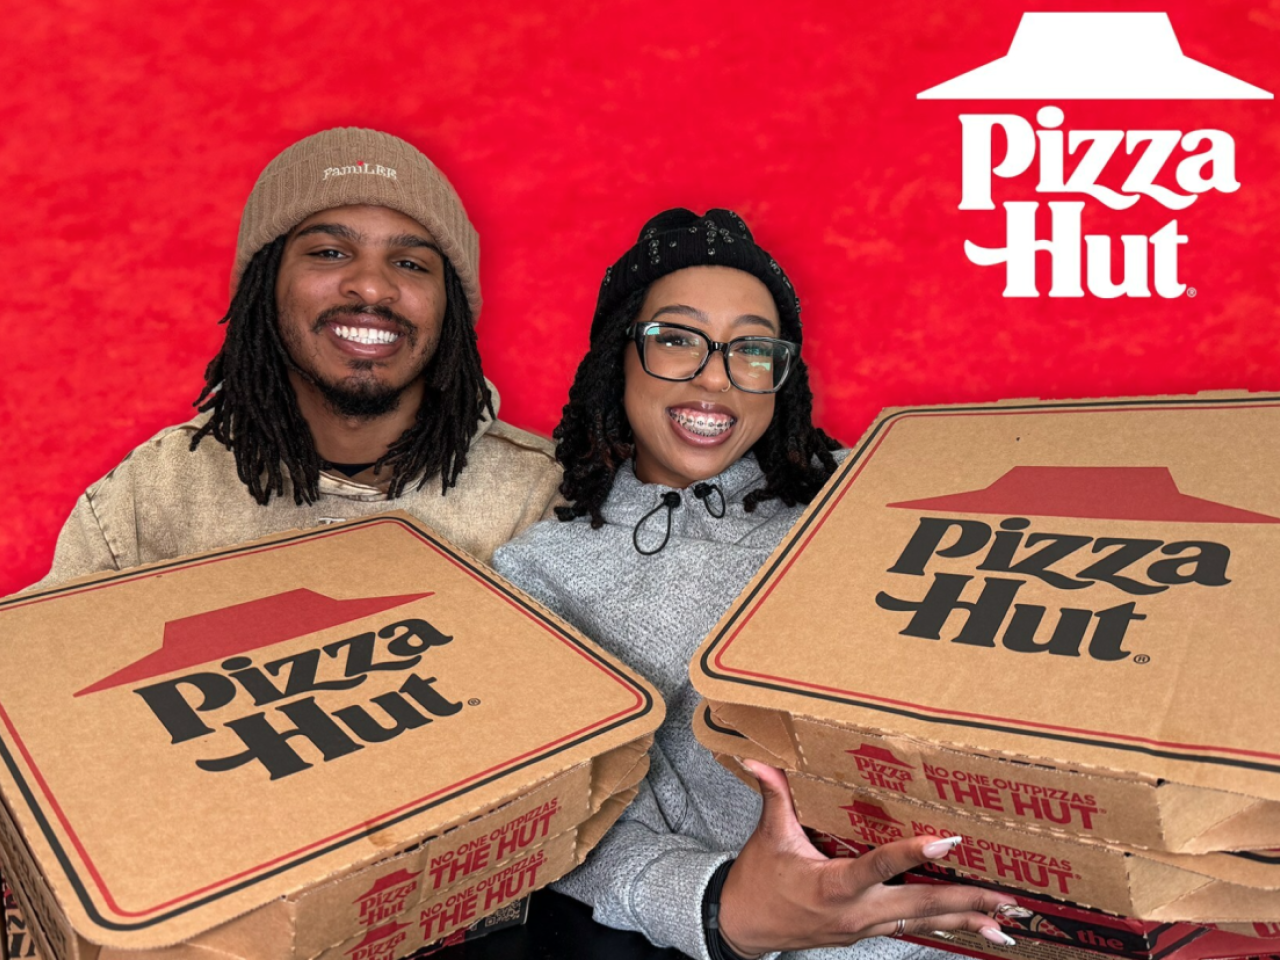 Keith Lee and his wife holding pizza hut boxes